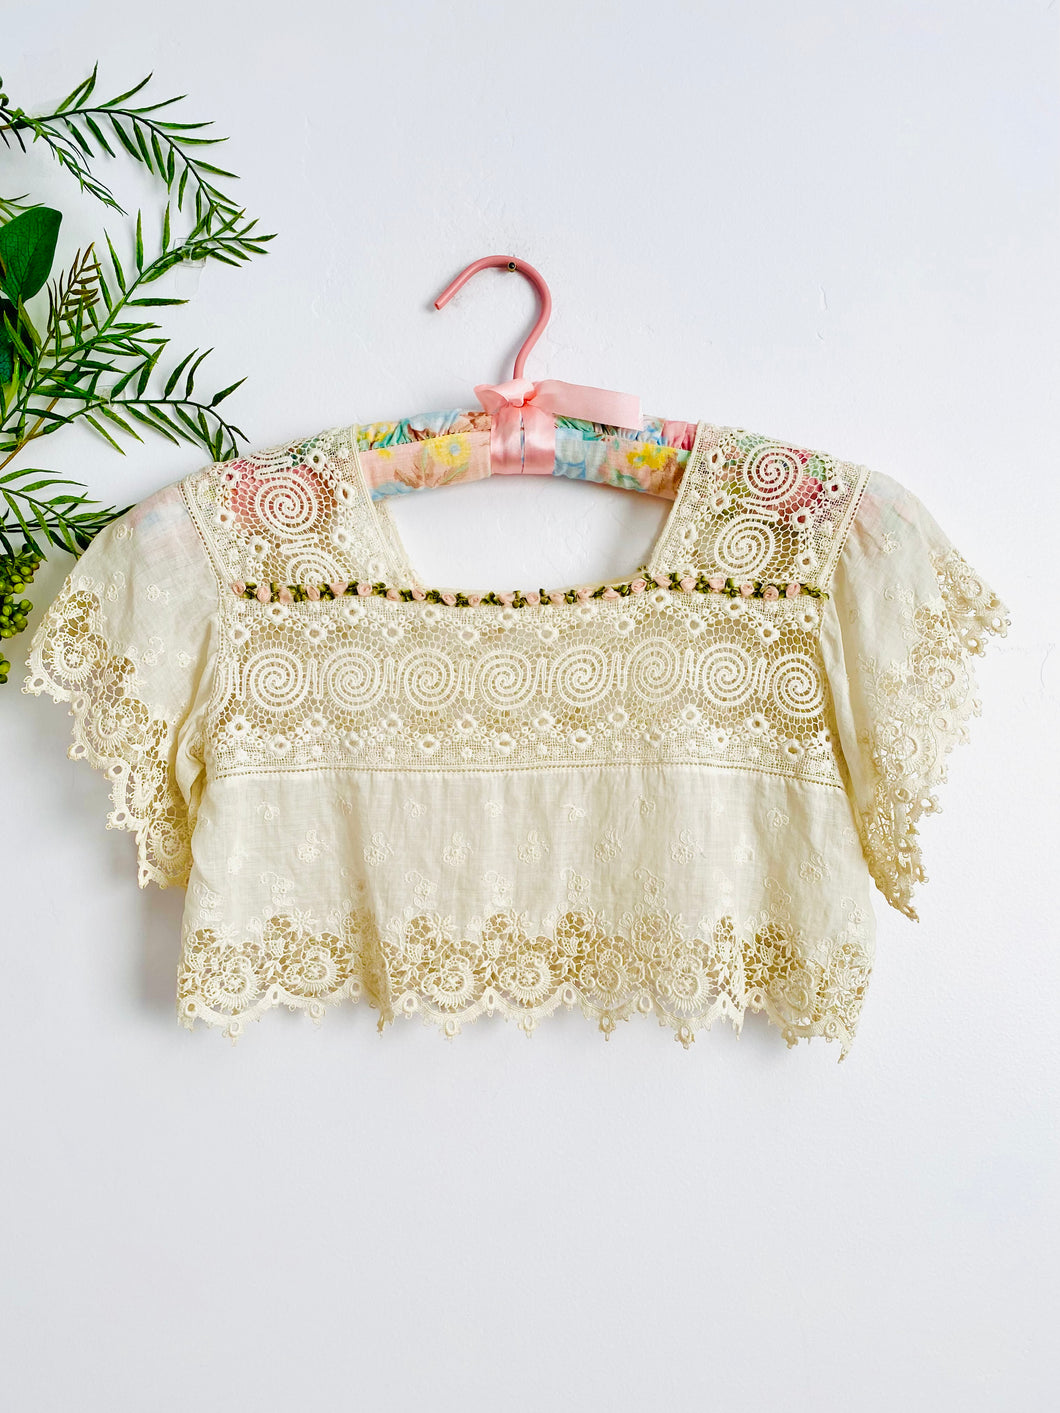 Antique 1910s lace camisole with rococo ribbon rosettes